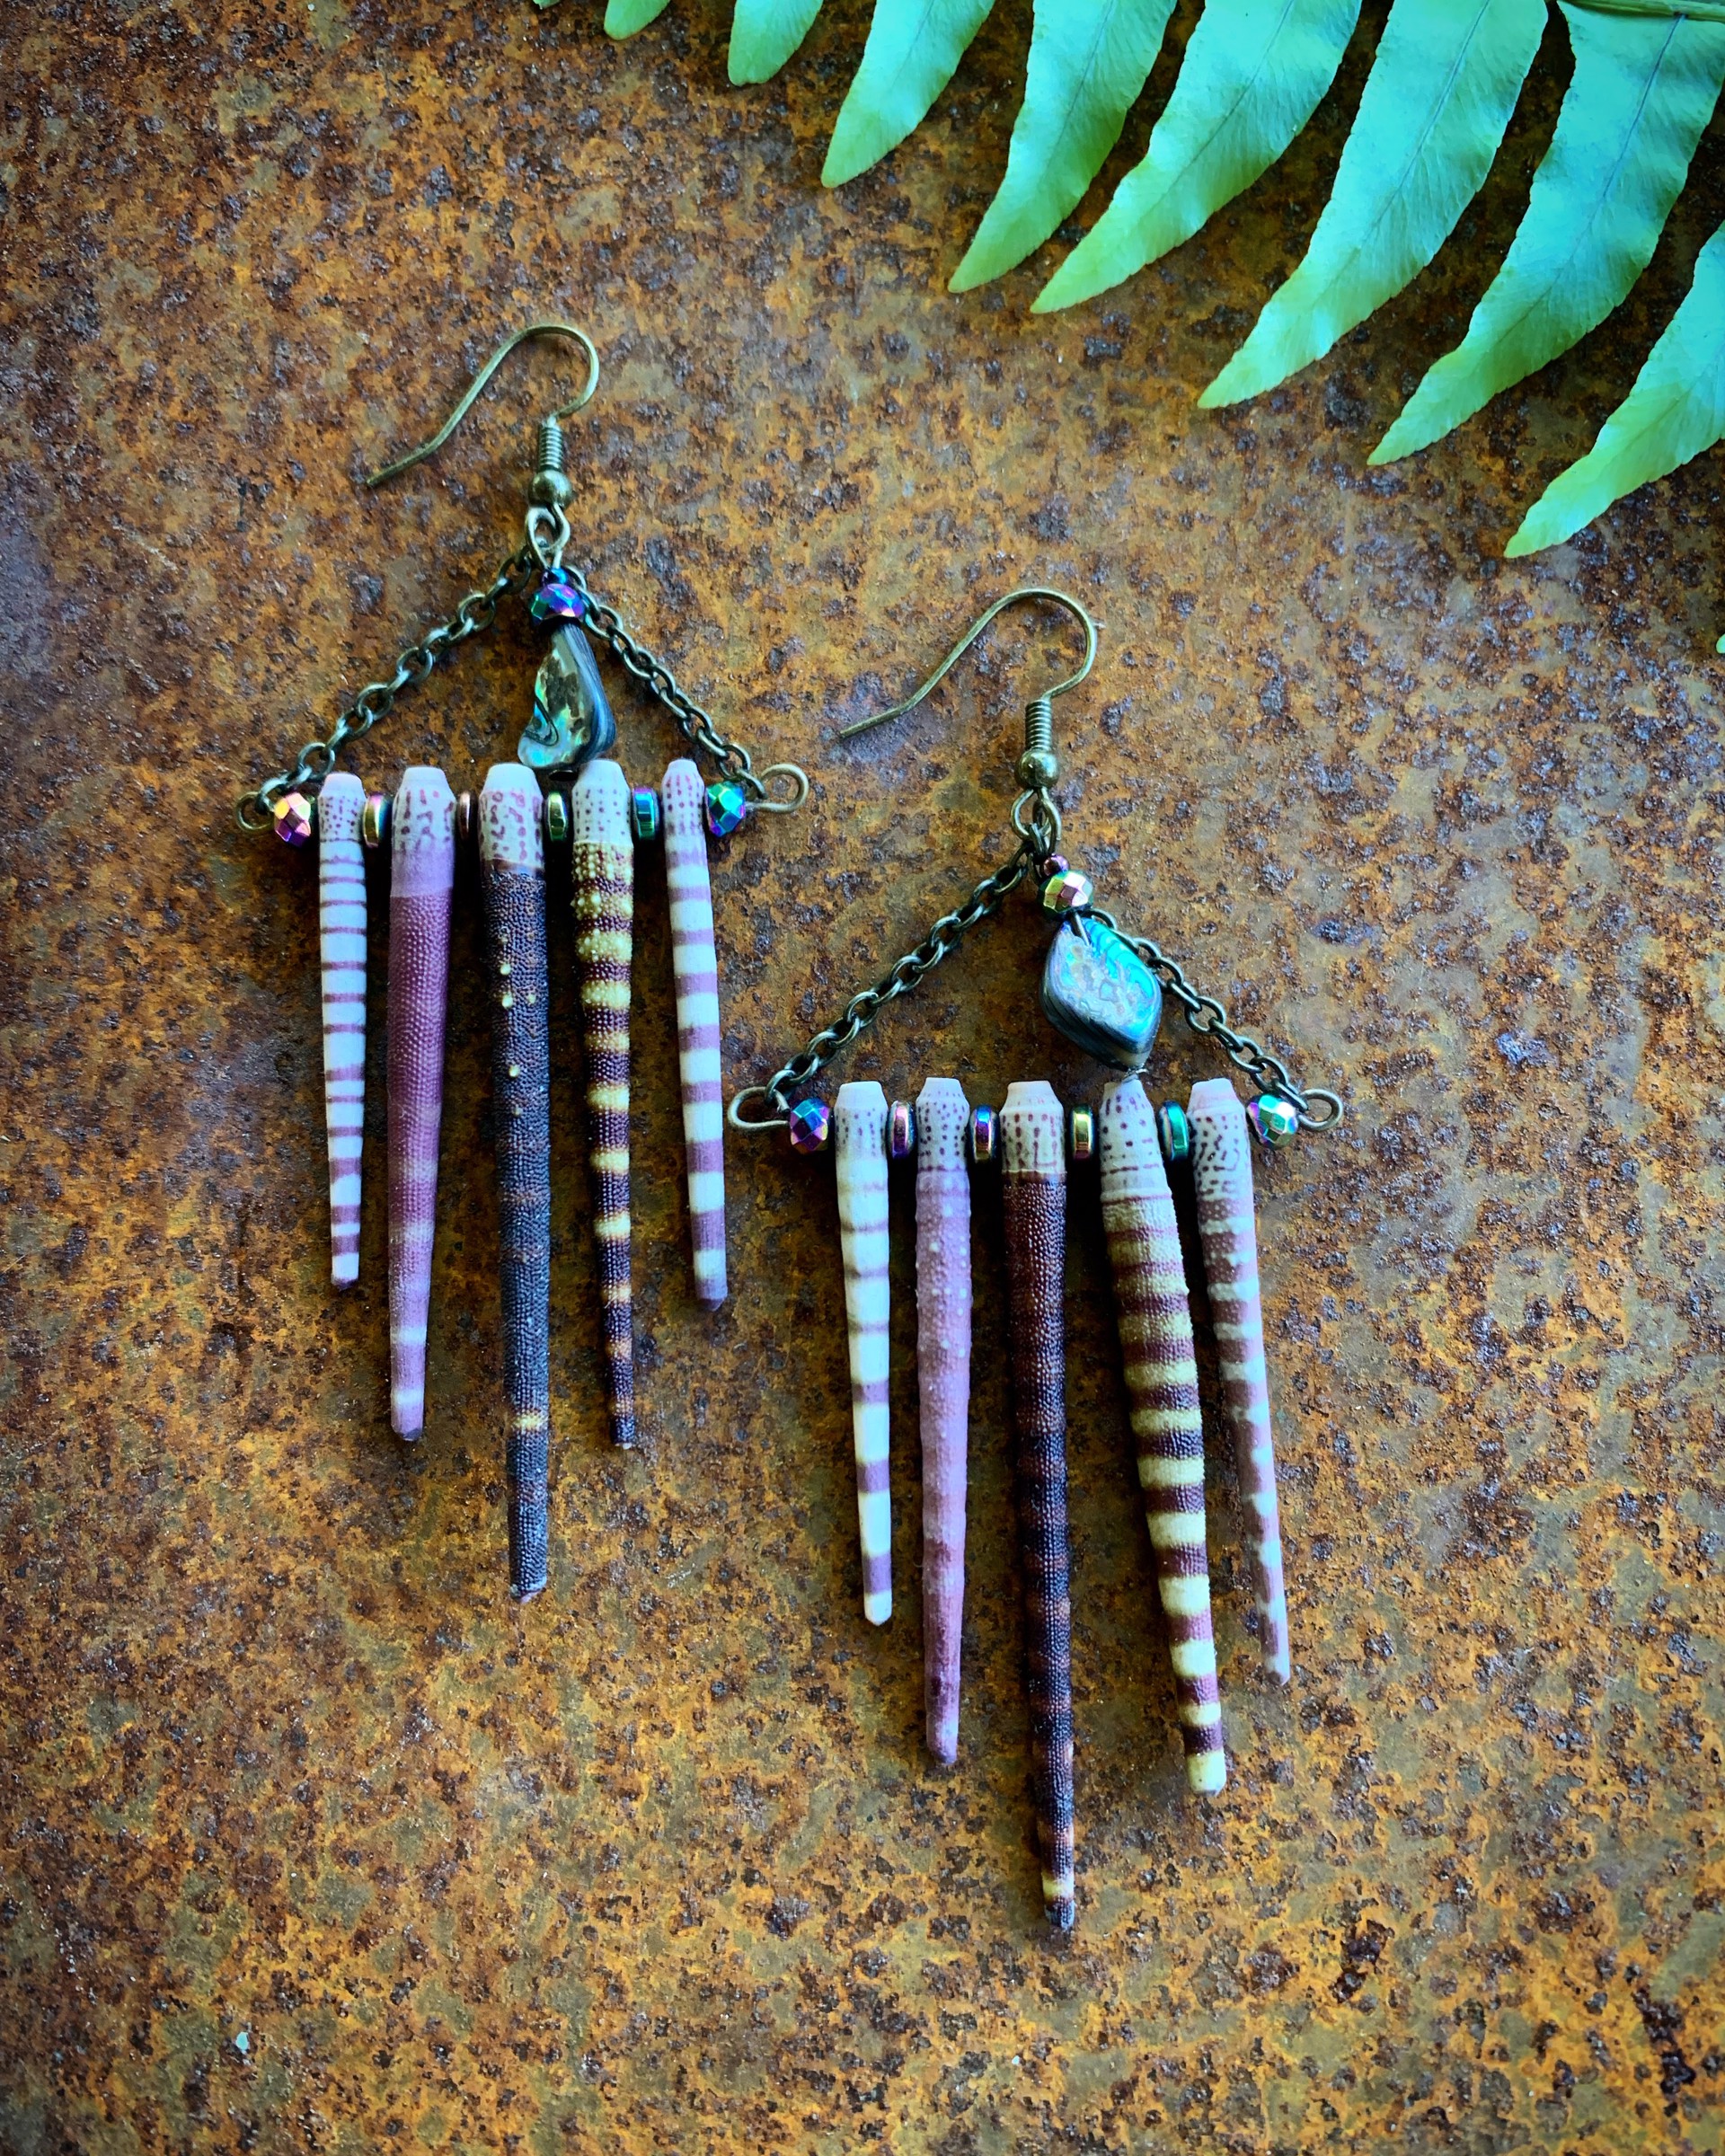 K664 Sea Urchin Spine Earrings with Abalone by Kelly Ormsby